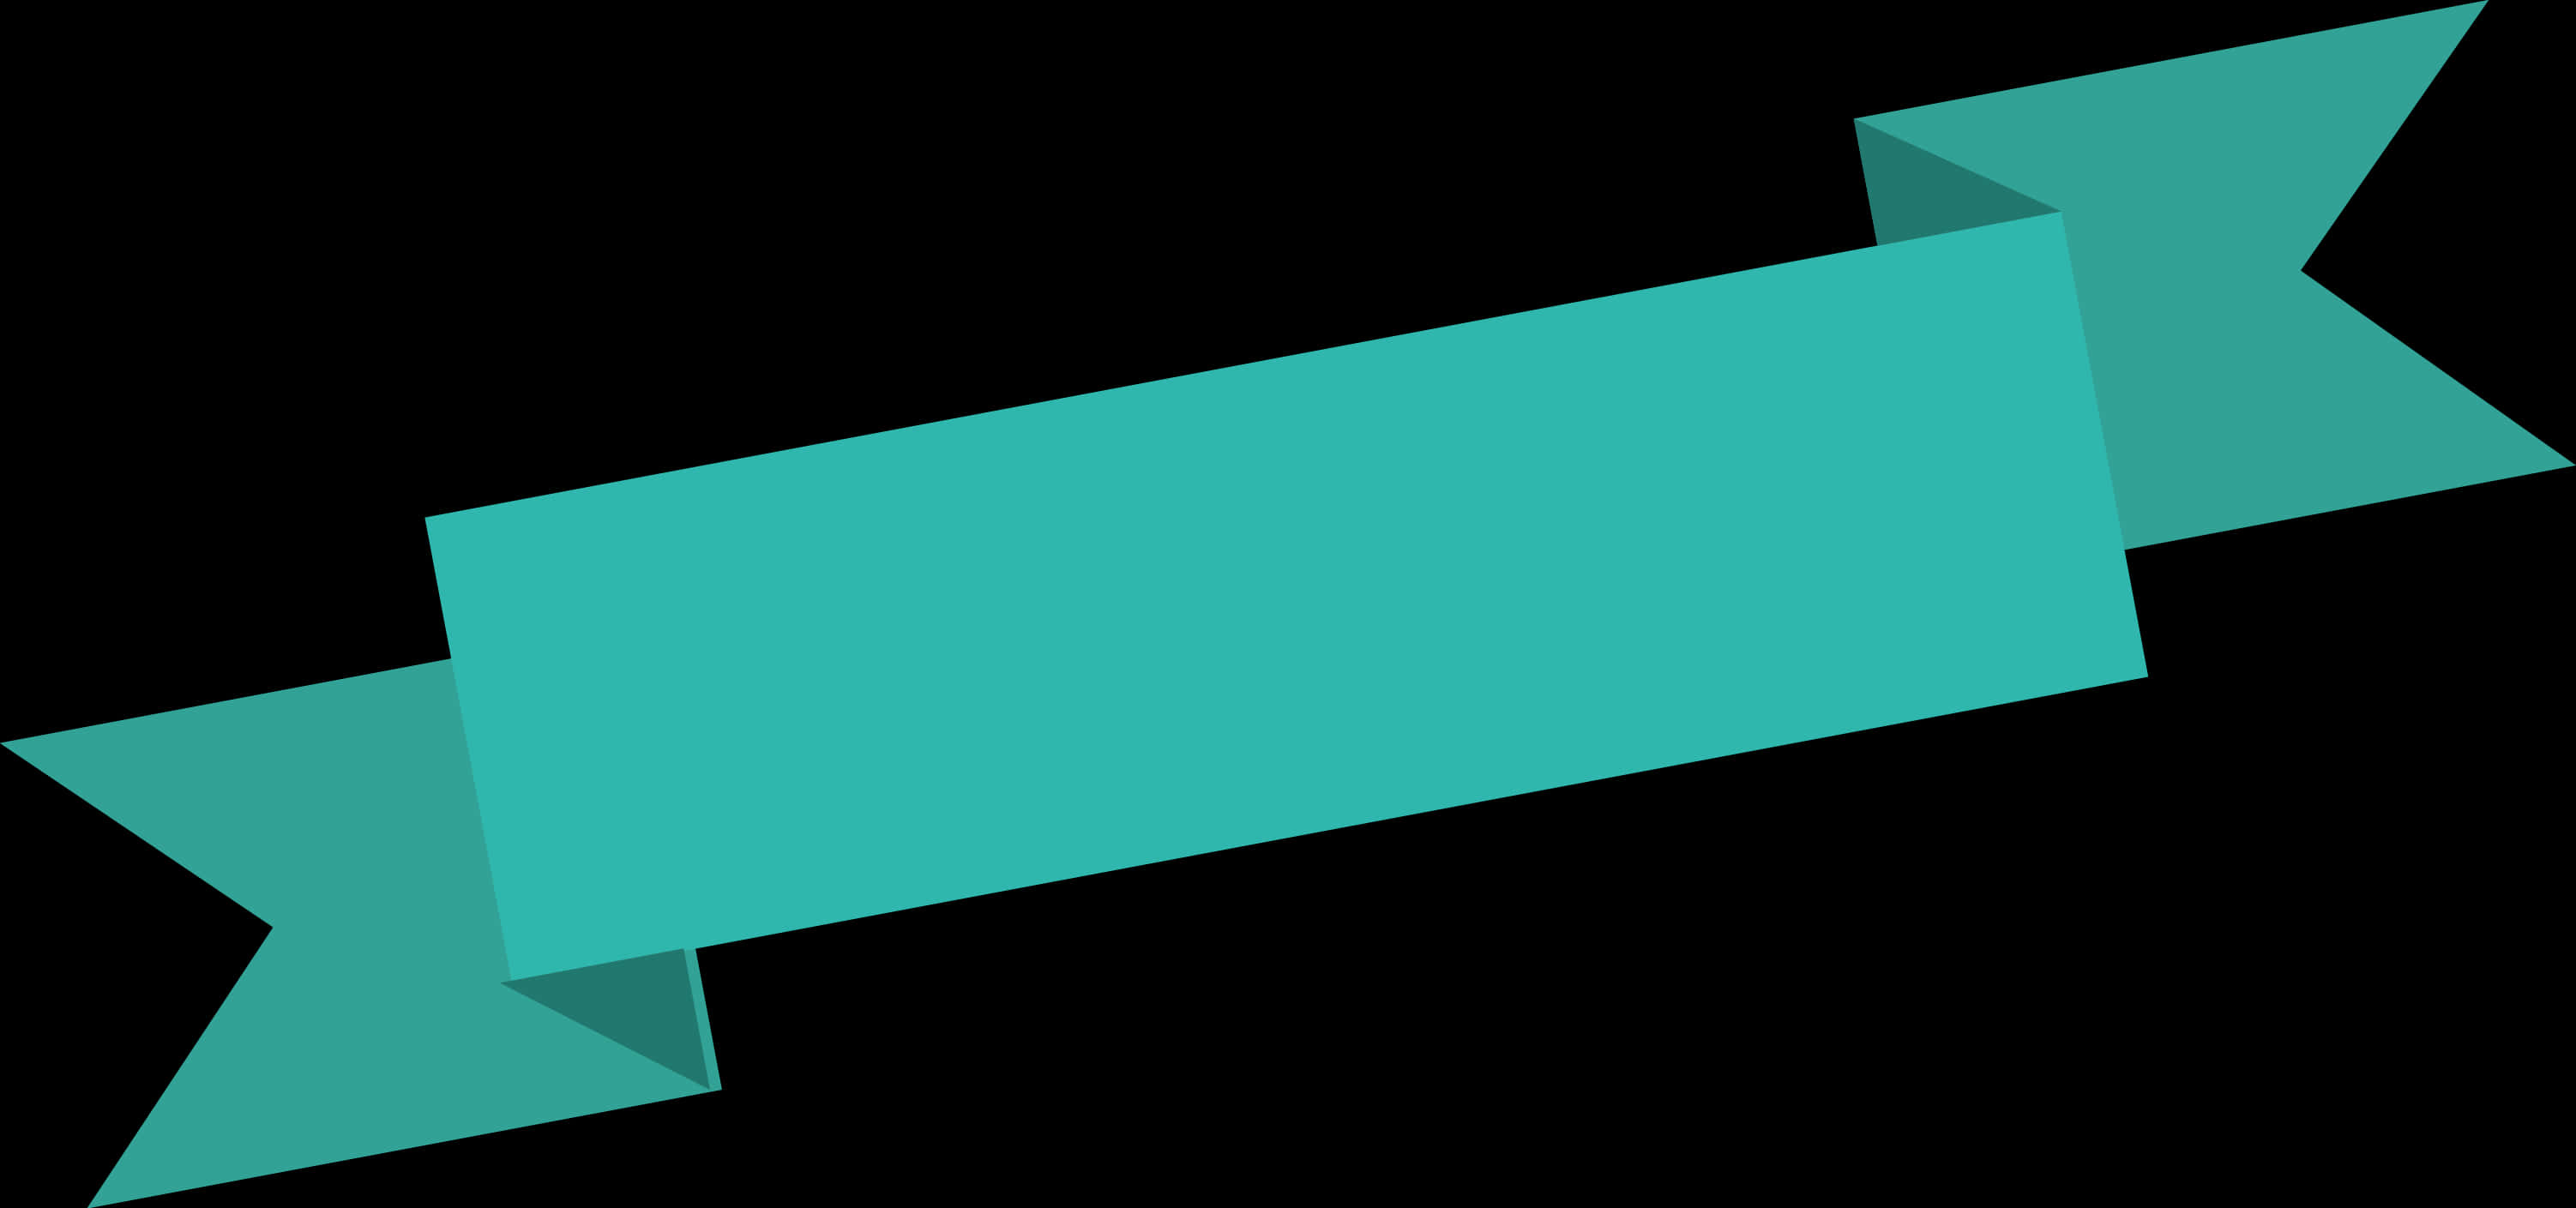 Teal Banner Ribbon Graphic